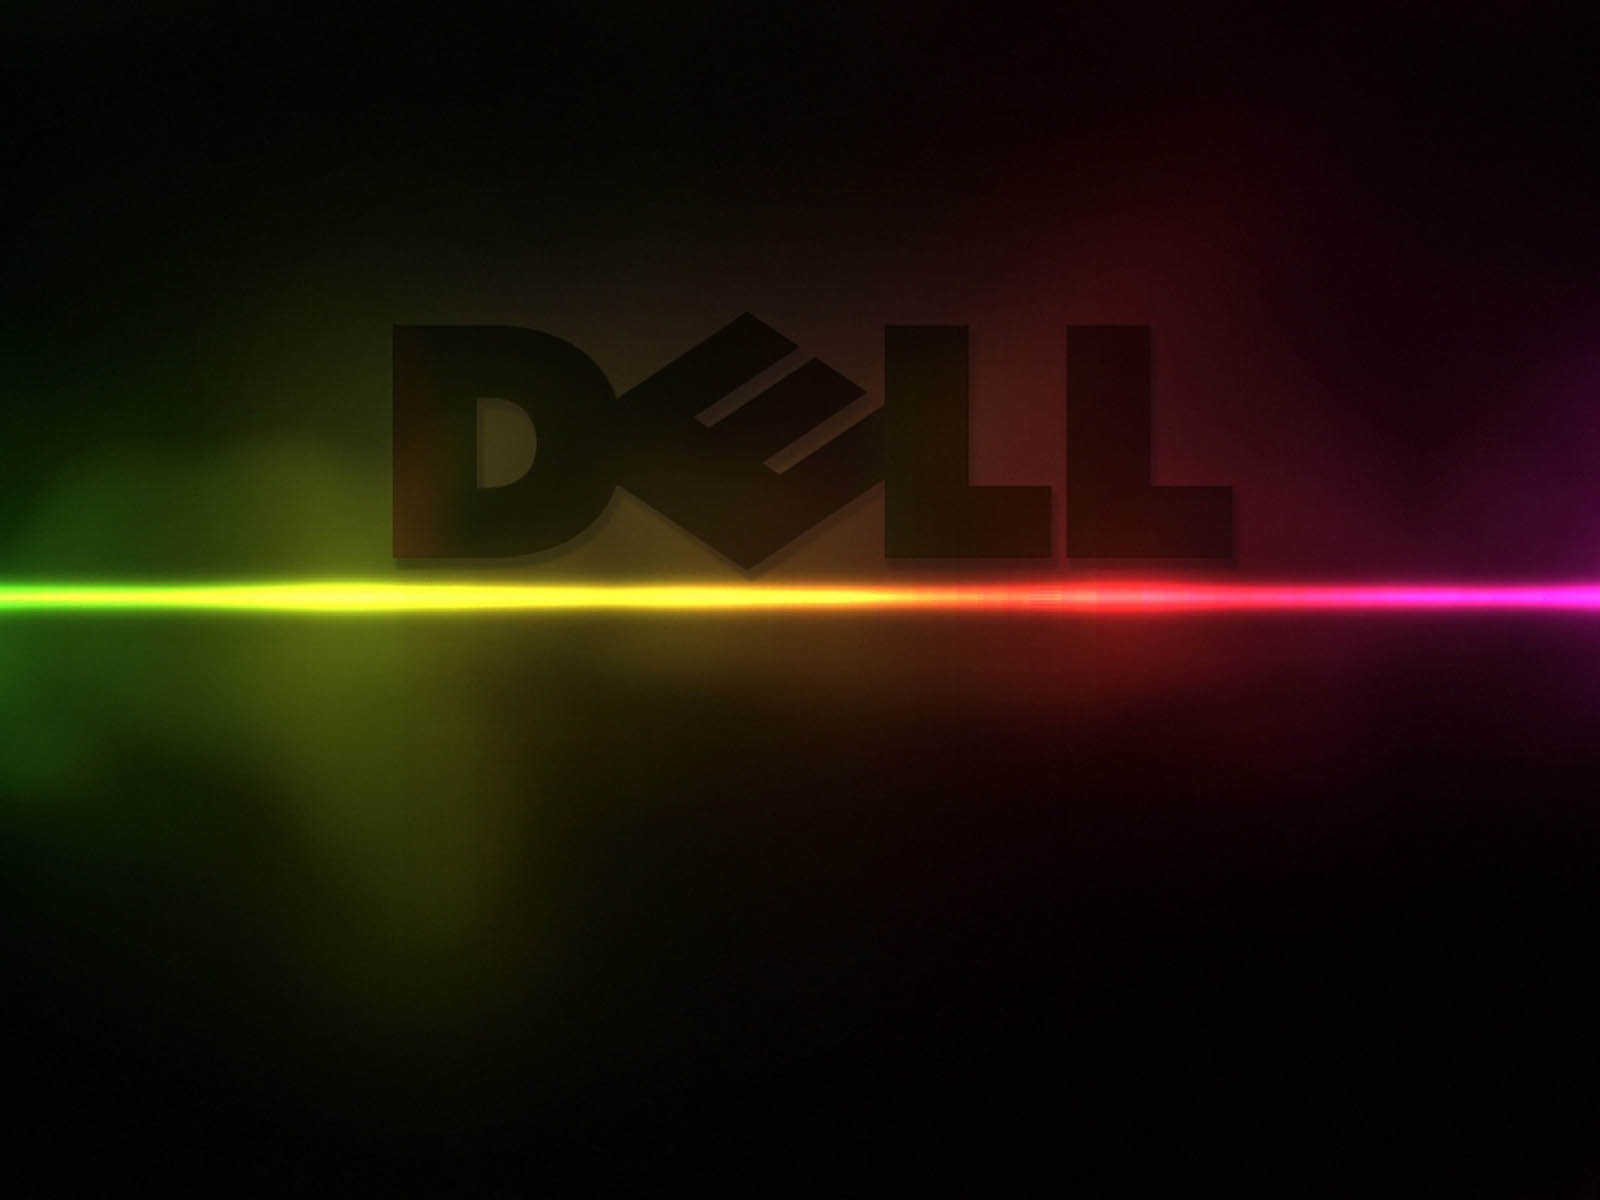 Are Watching The Dell Wallpaper Desktop